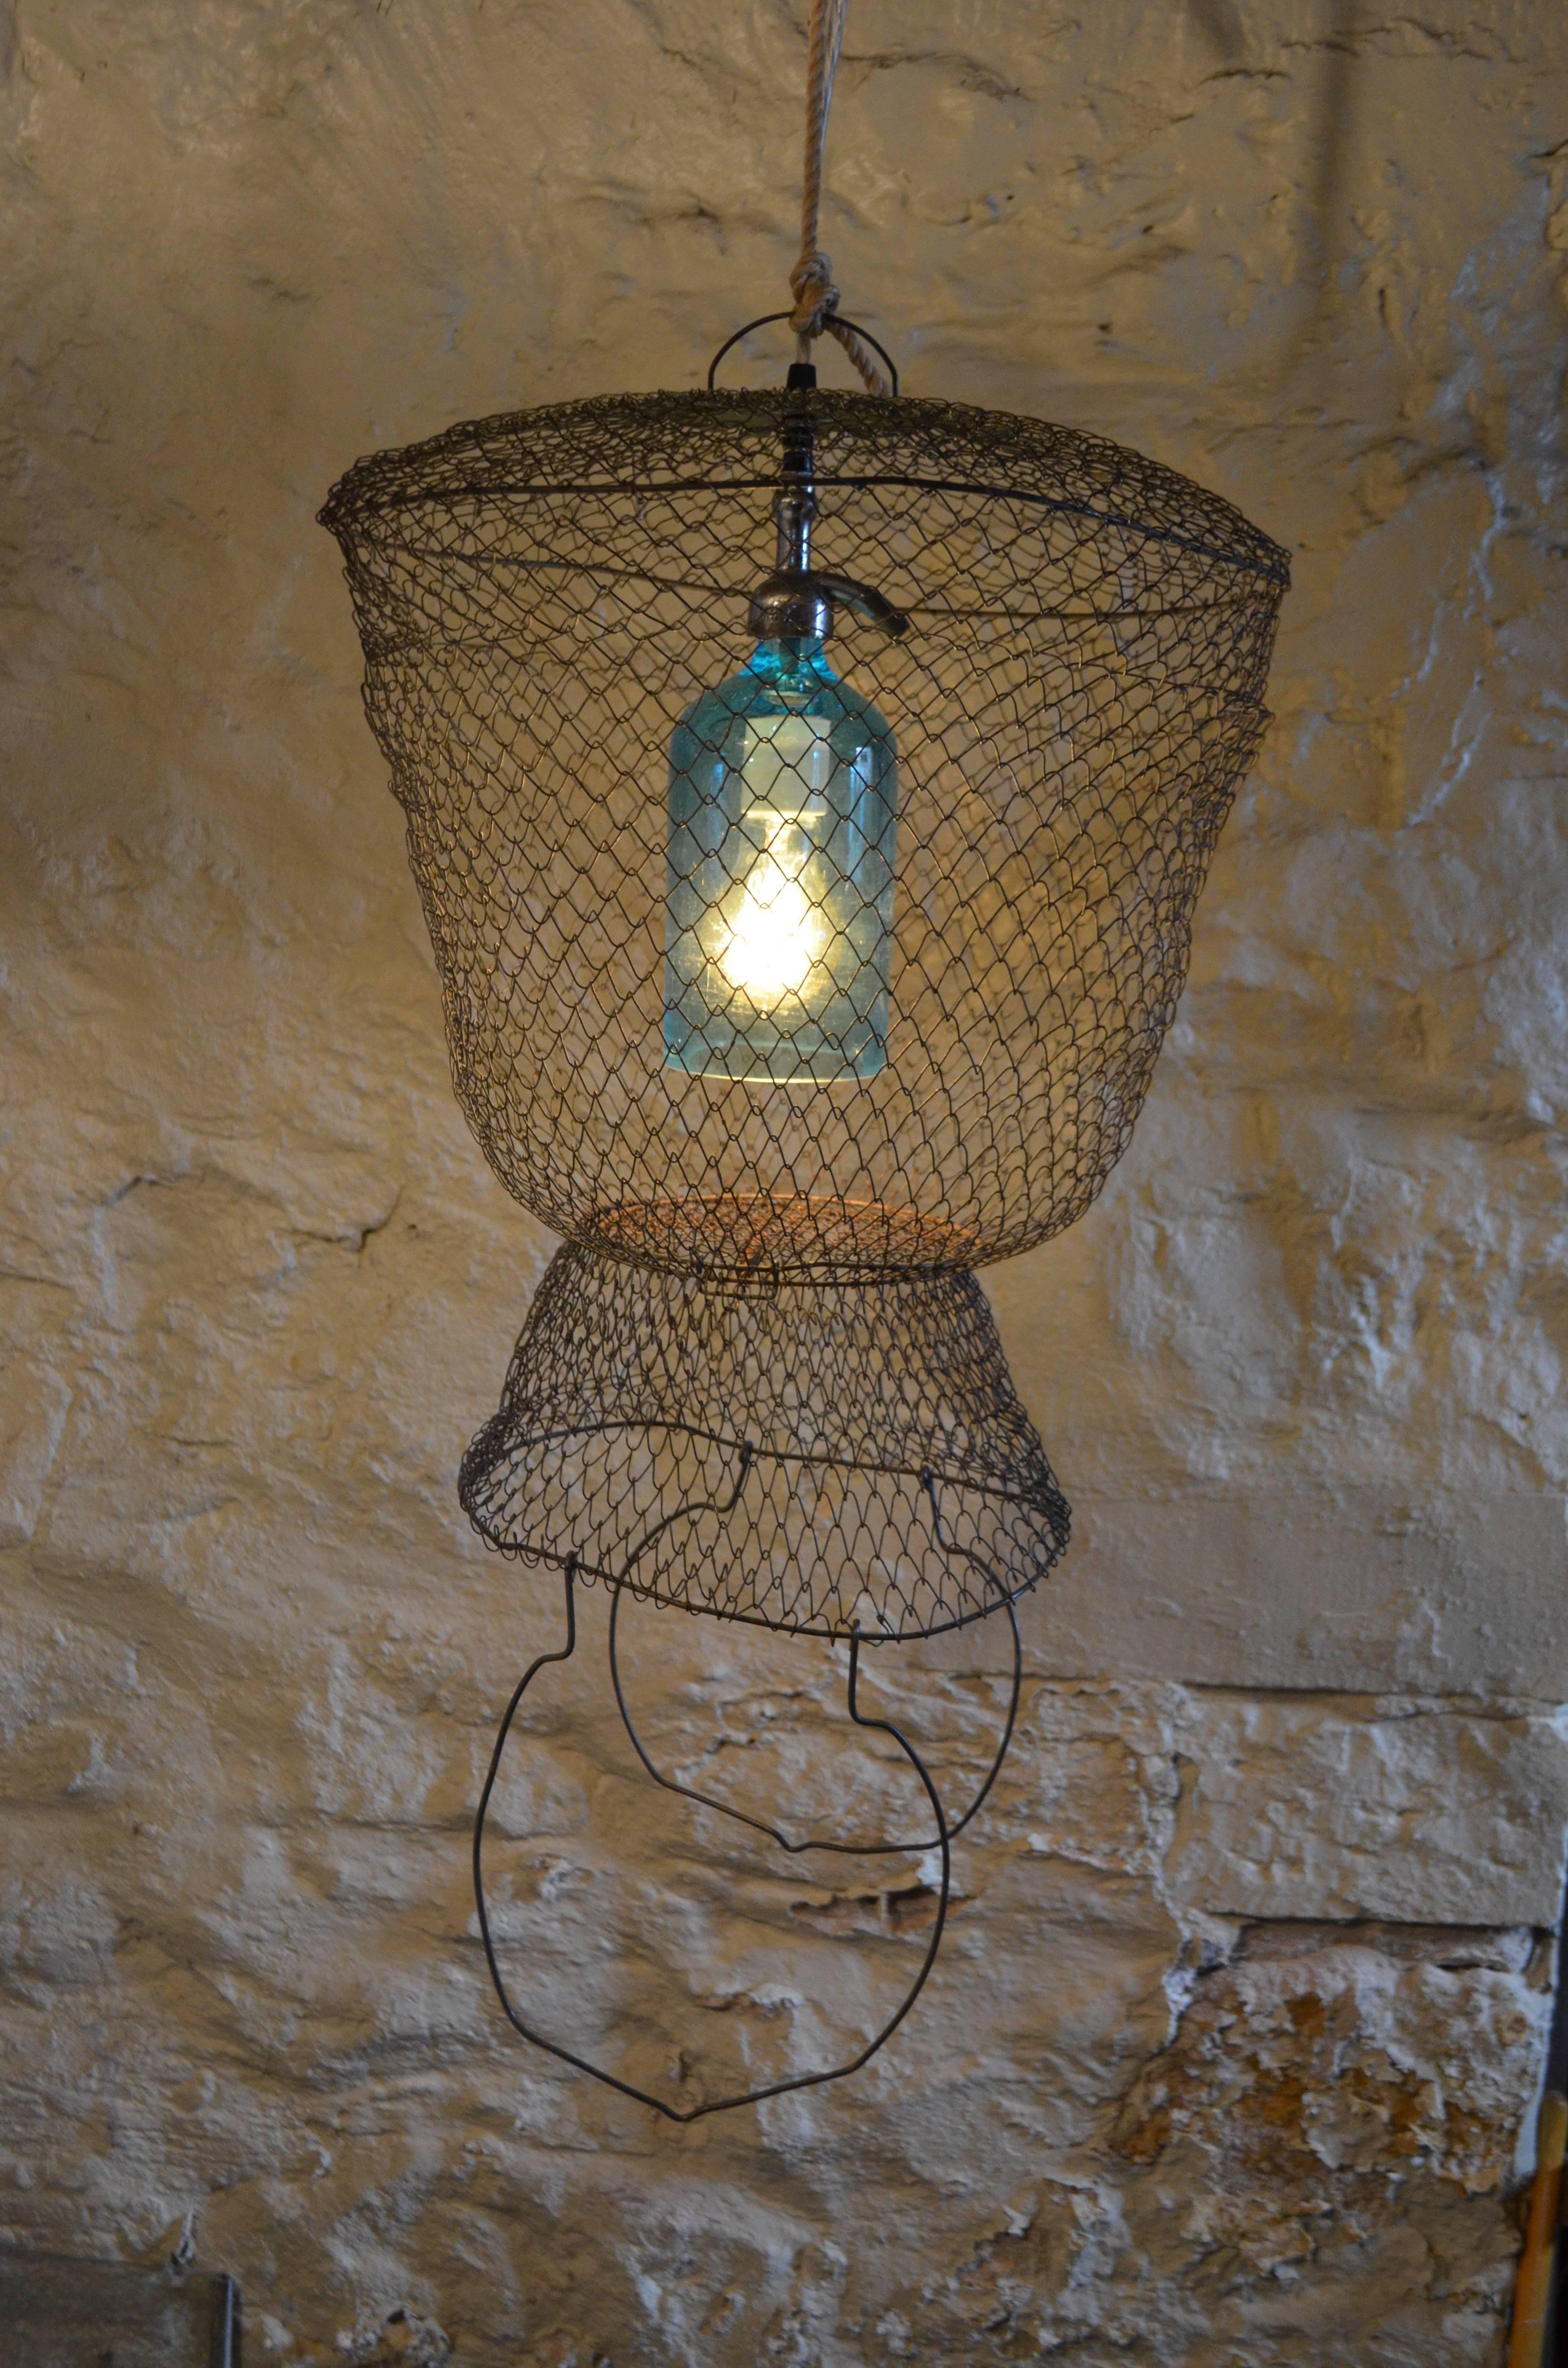 Pendant light from a sea blue, New York etched seltzer bottle suspended inside a steel mesh fish basket from France. Just in time for the summer home on the ocean, lake or at your wooded retreat. Wonderfully soft ambient for porch or patio and those